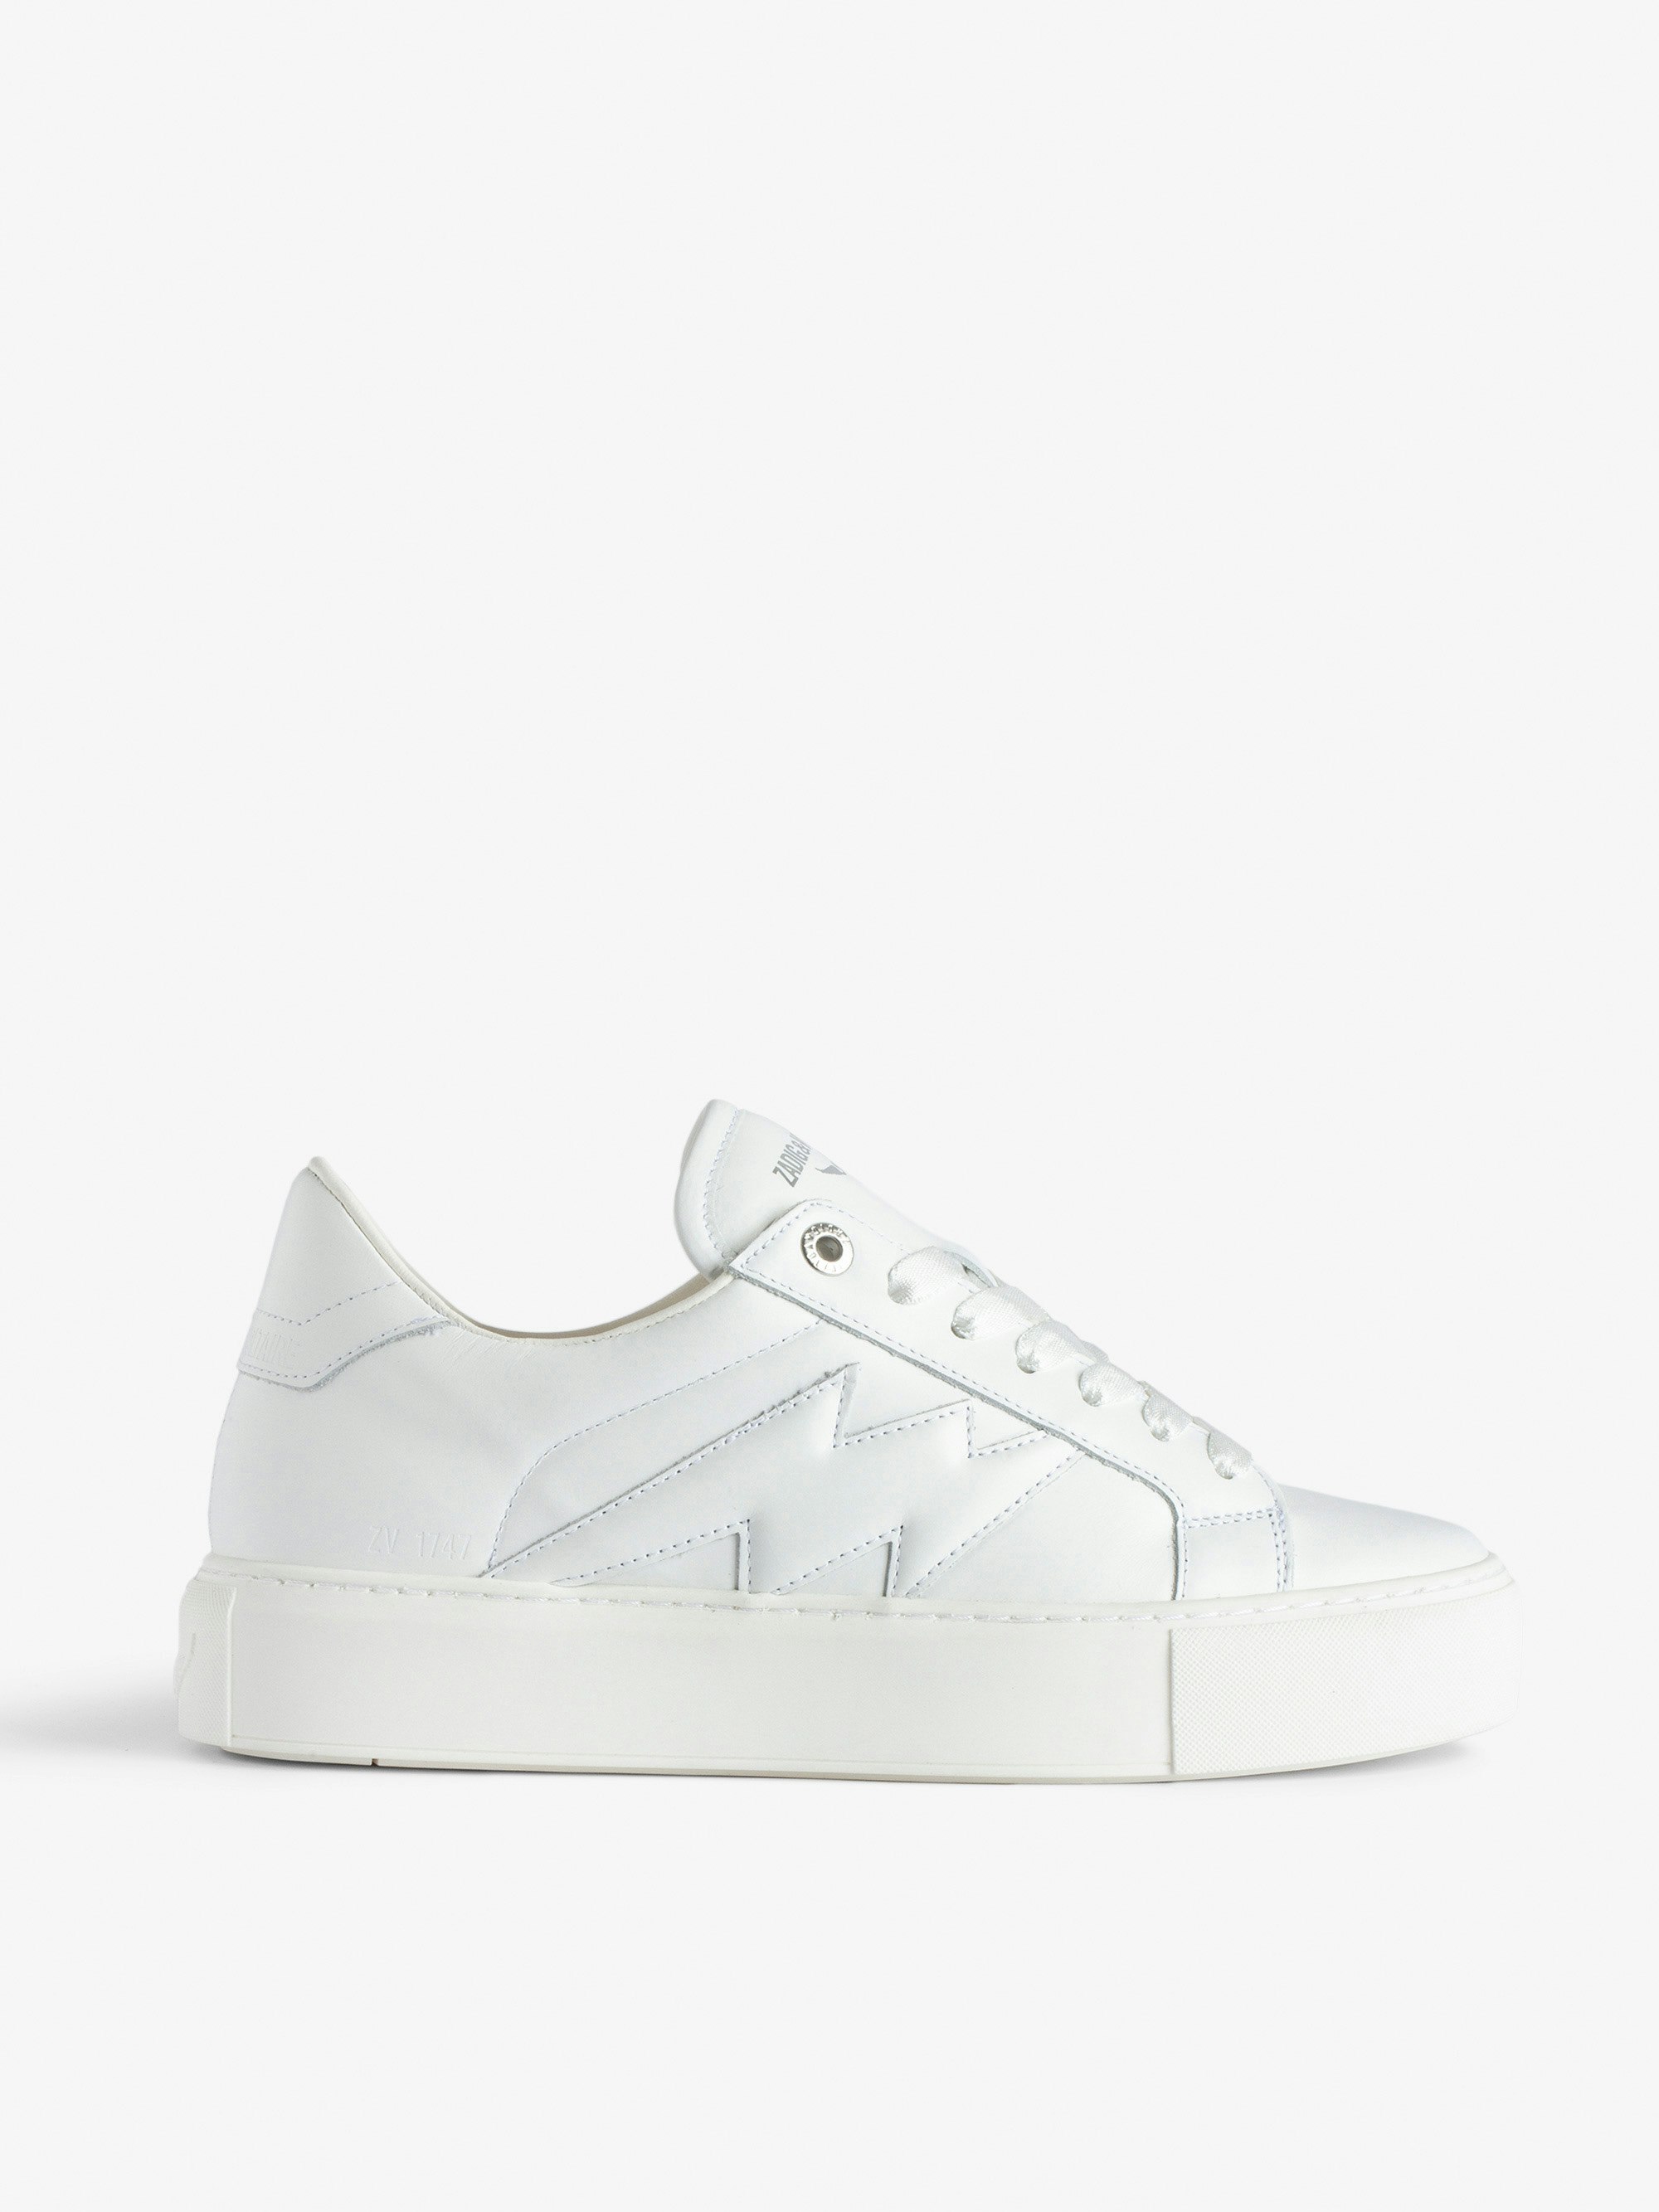 ZV1747 La Flash Low-Top Platform Sneakers - Women’s white smooth leather low-top sneakers with lightning bolt panels and chunky sole.